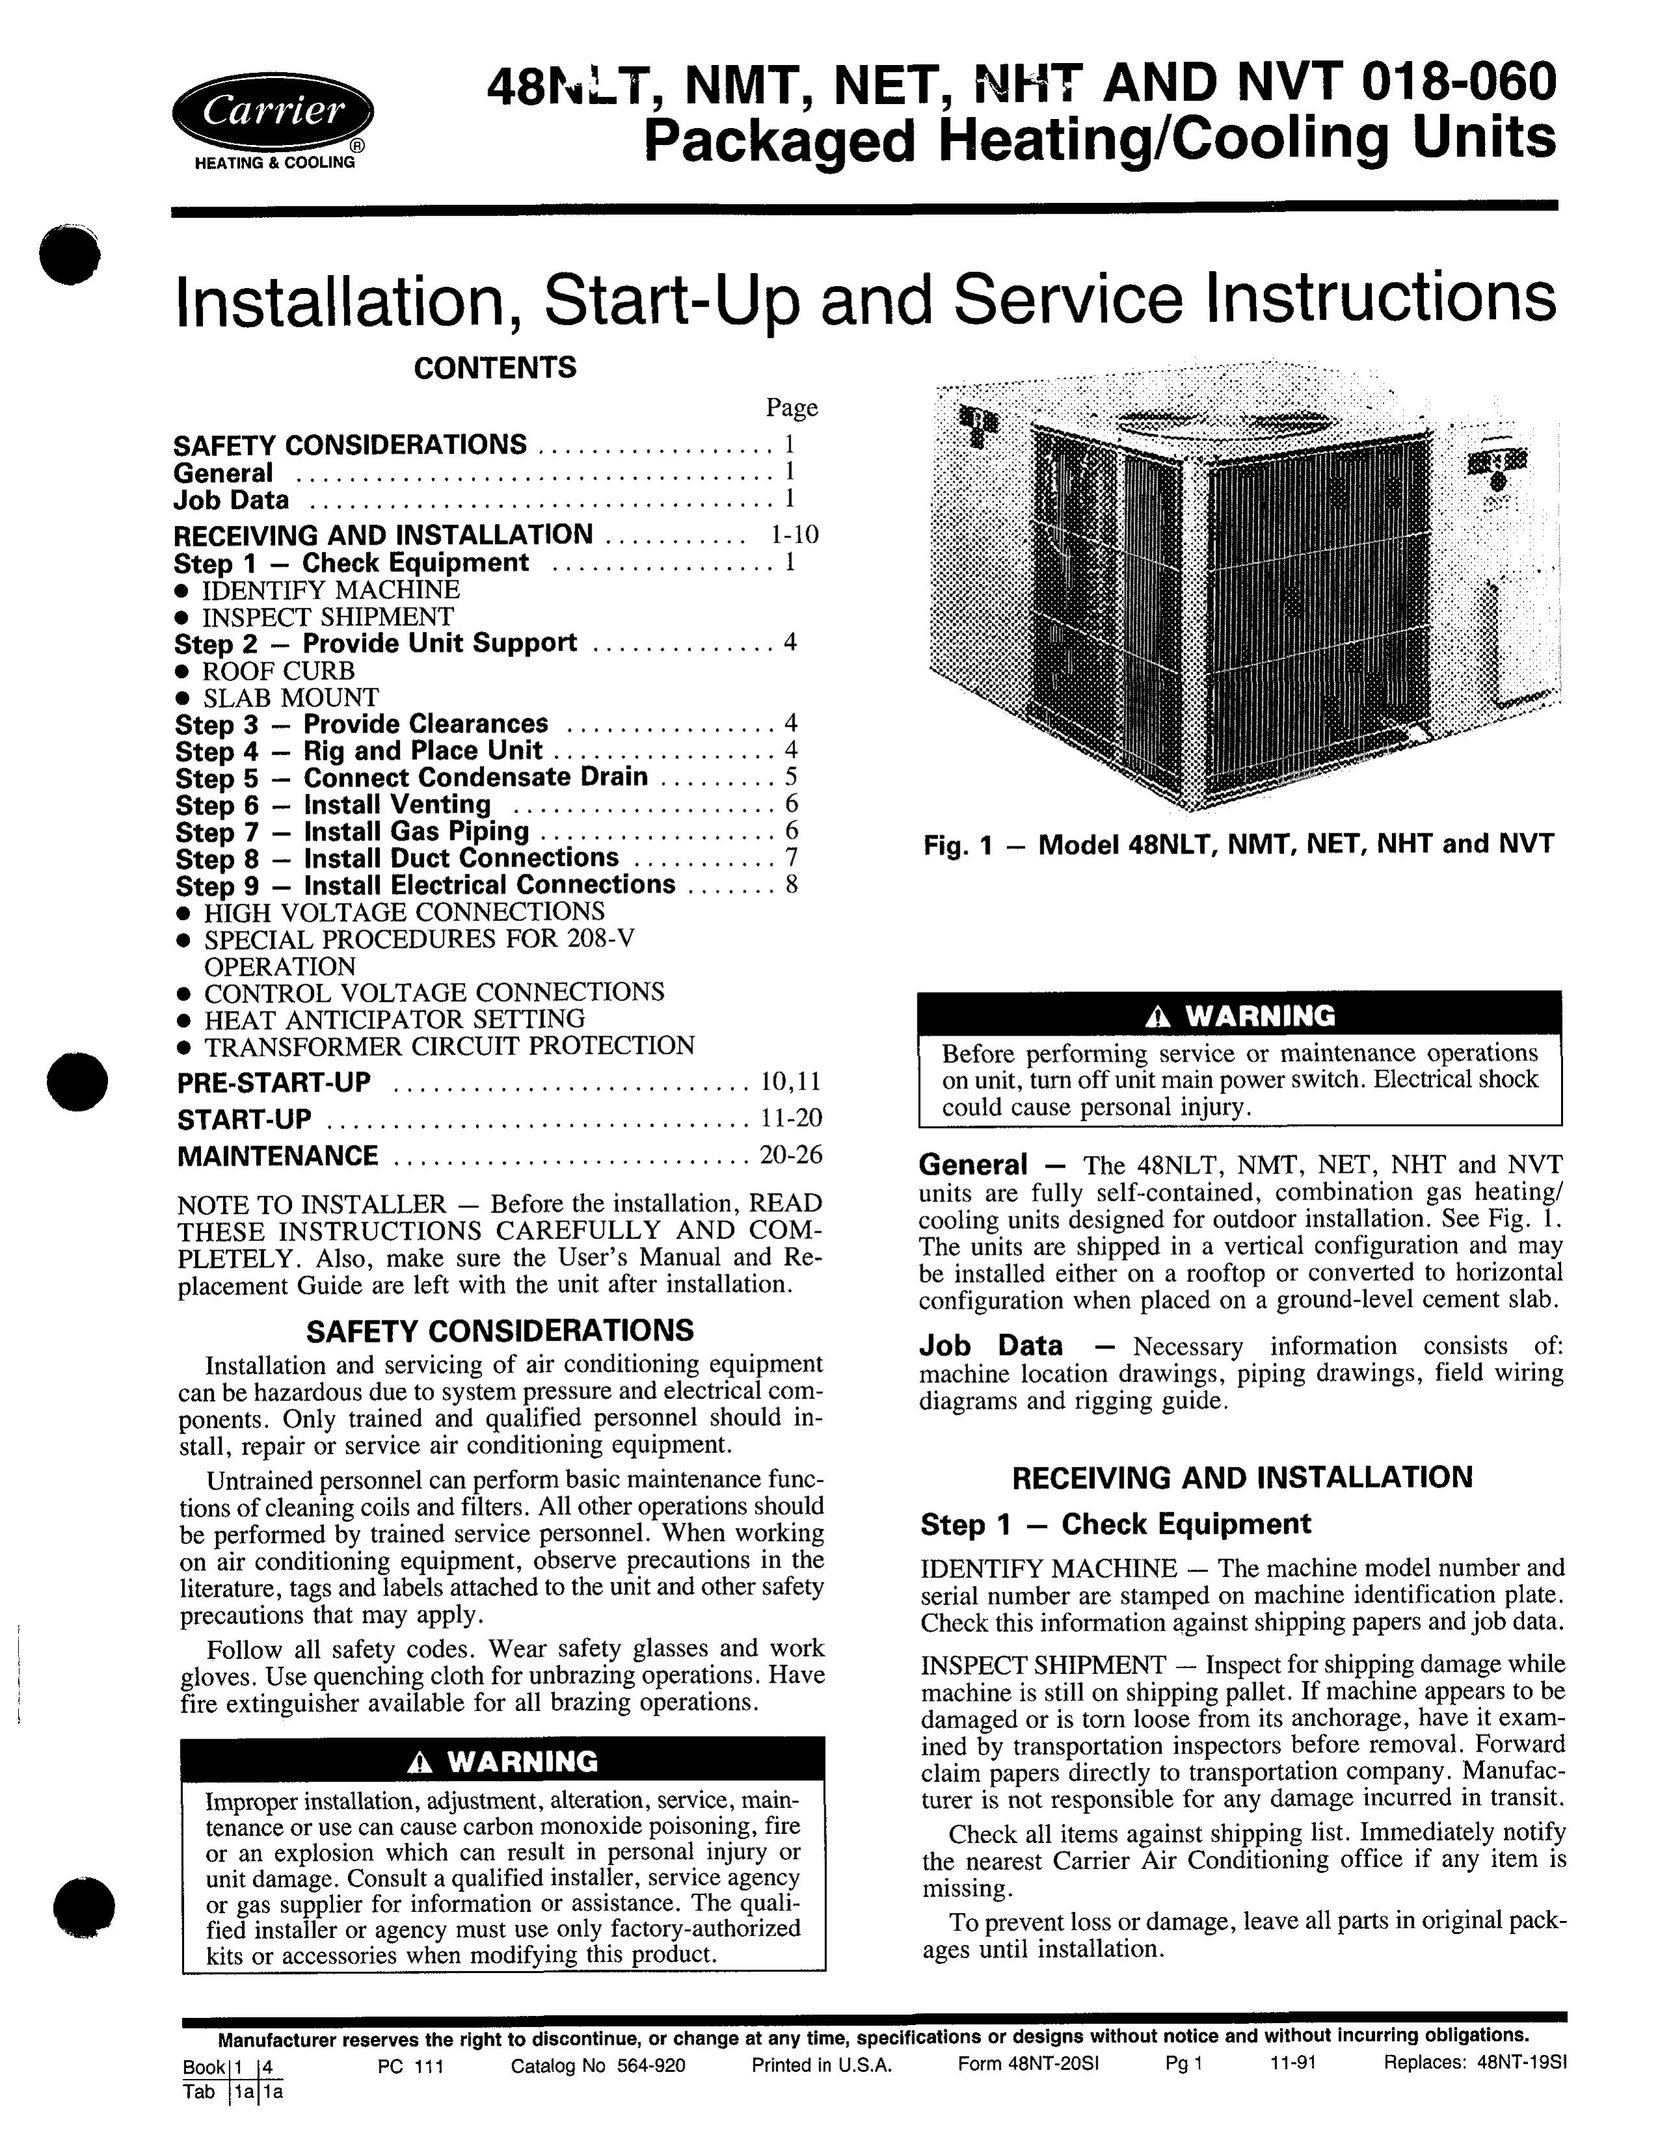 Carrier 48NMT Heating System User Manual